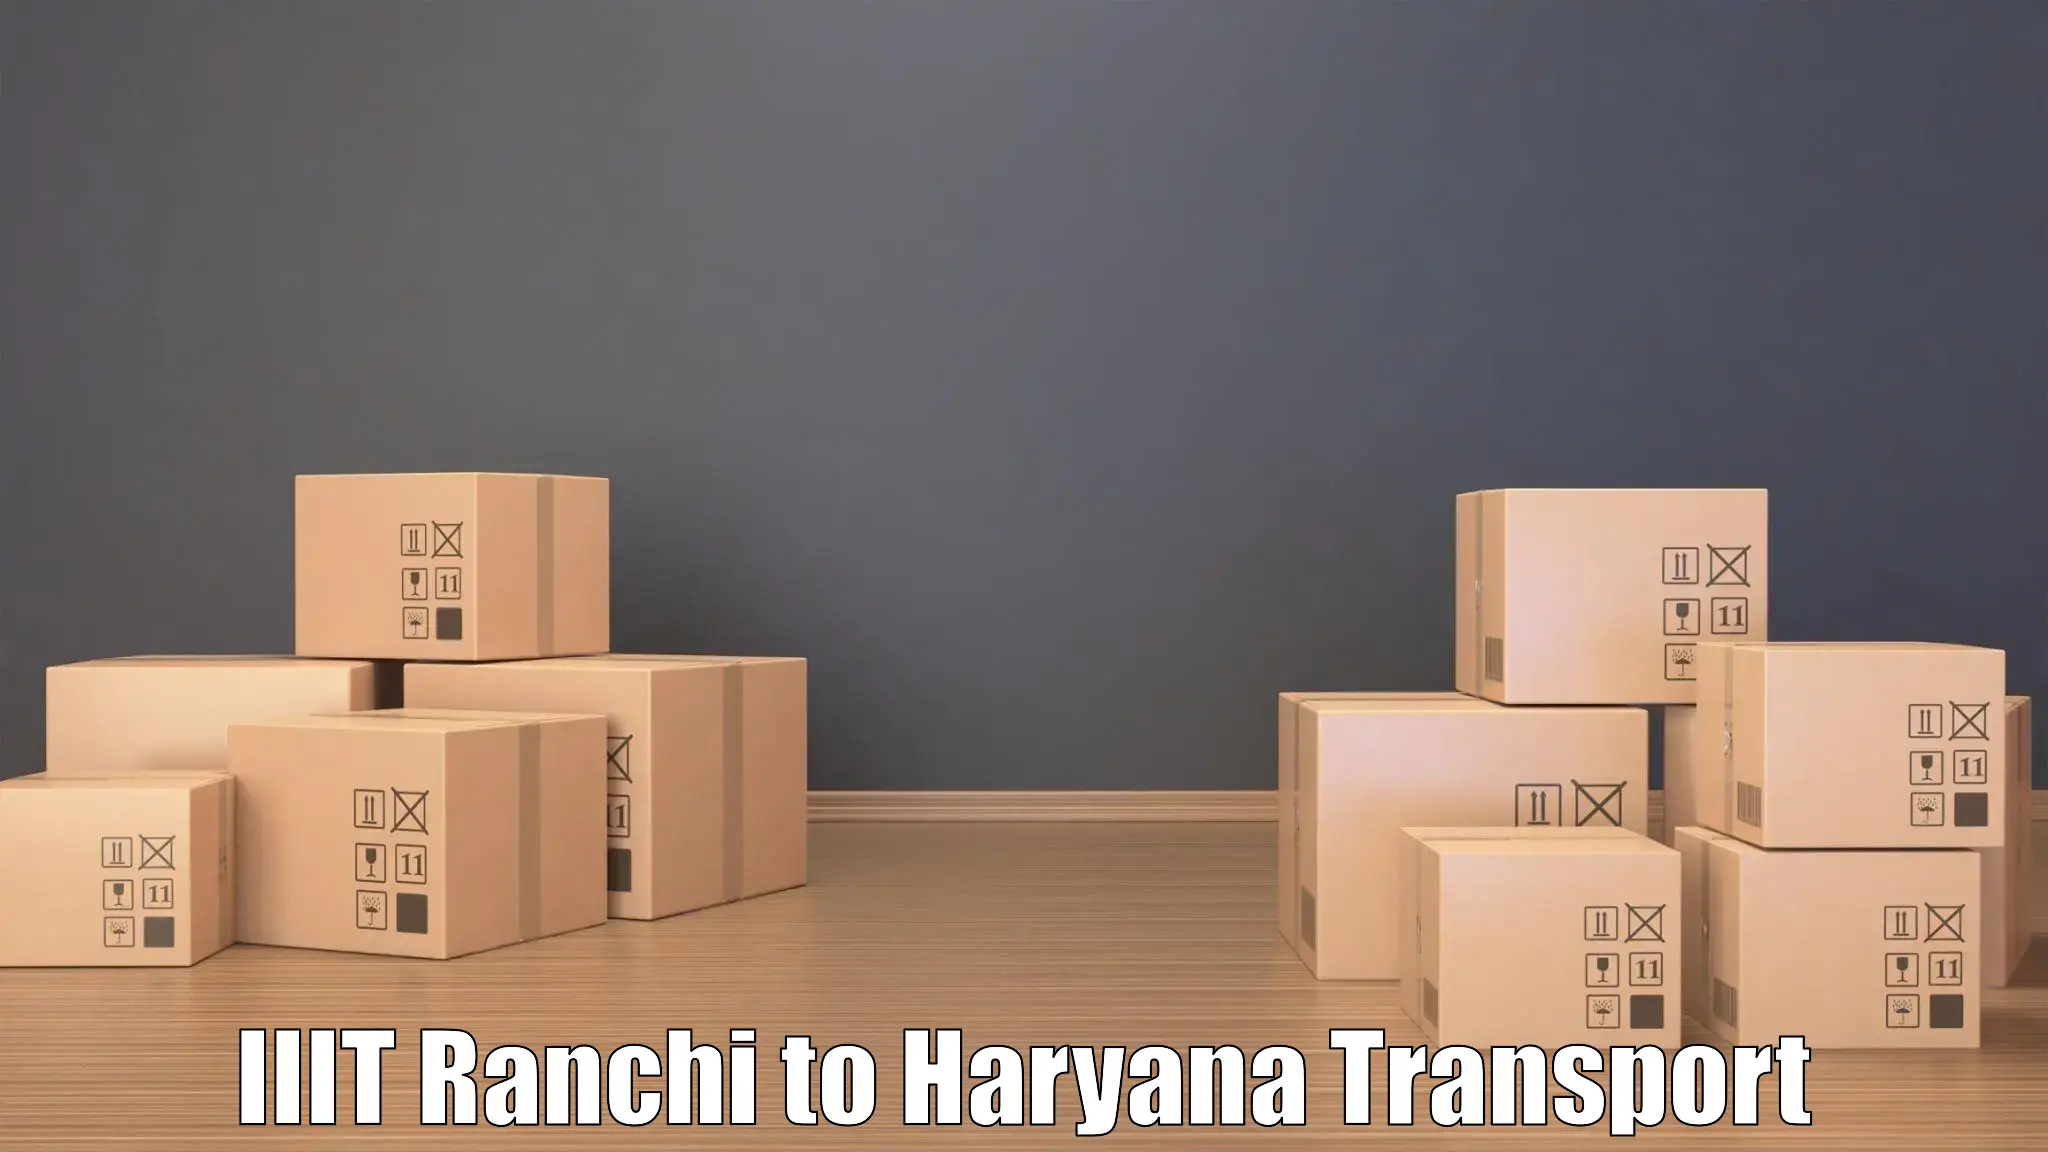 Container transport service IIIT Ranchi to Hansi